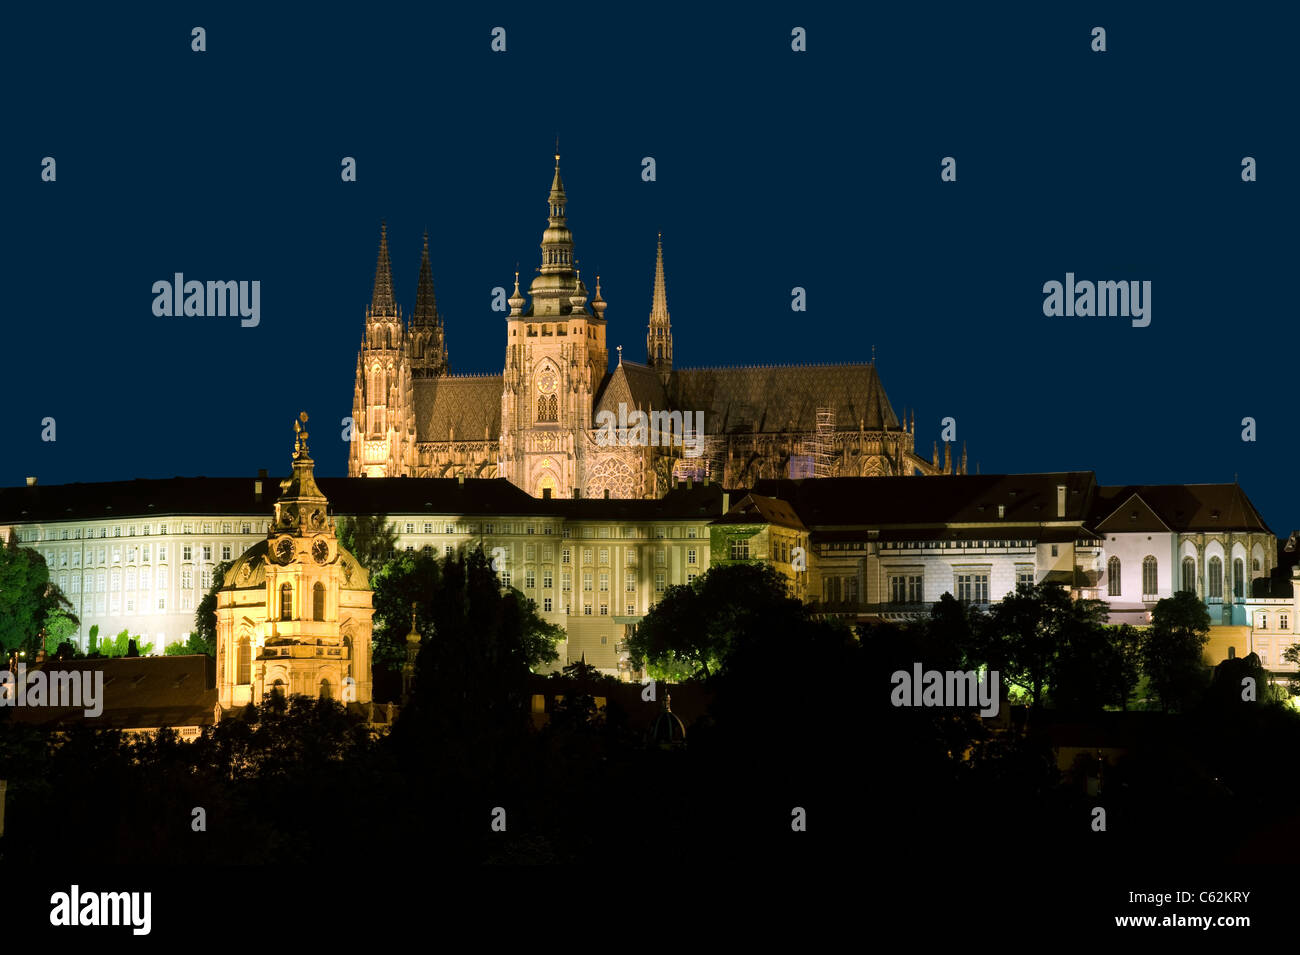 Night picture of Hradcany, St. Vitus and St. Nicholas at Prague Stock Photo